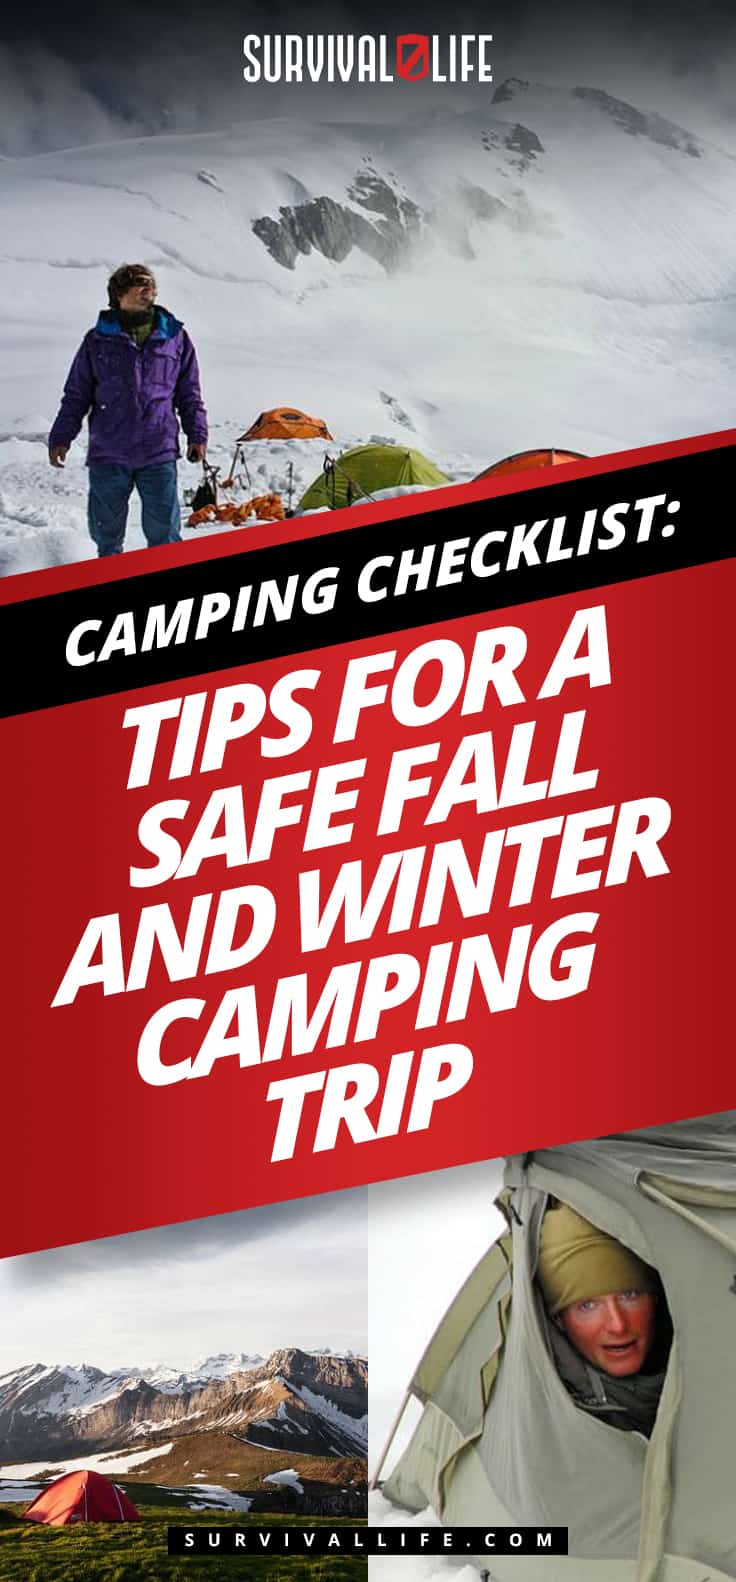 Camping Checklist: Tips for a Safe Fall and Winter Camping Trip